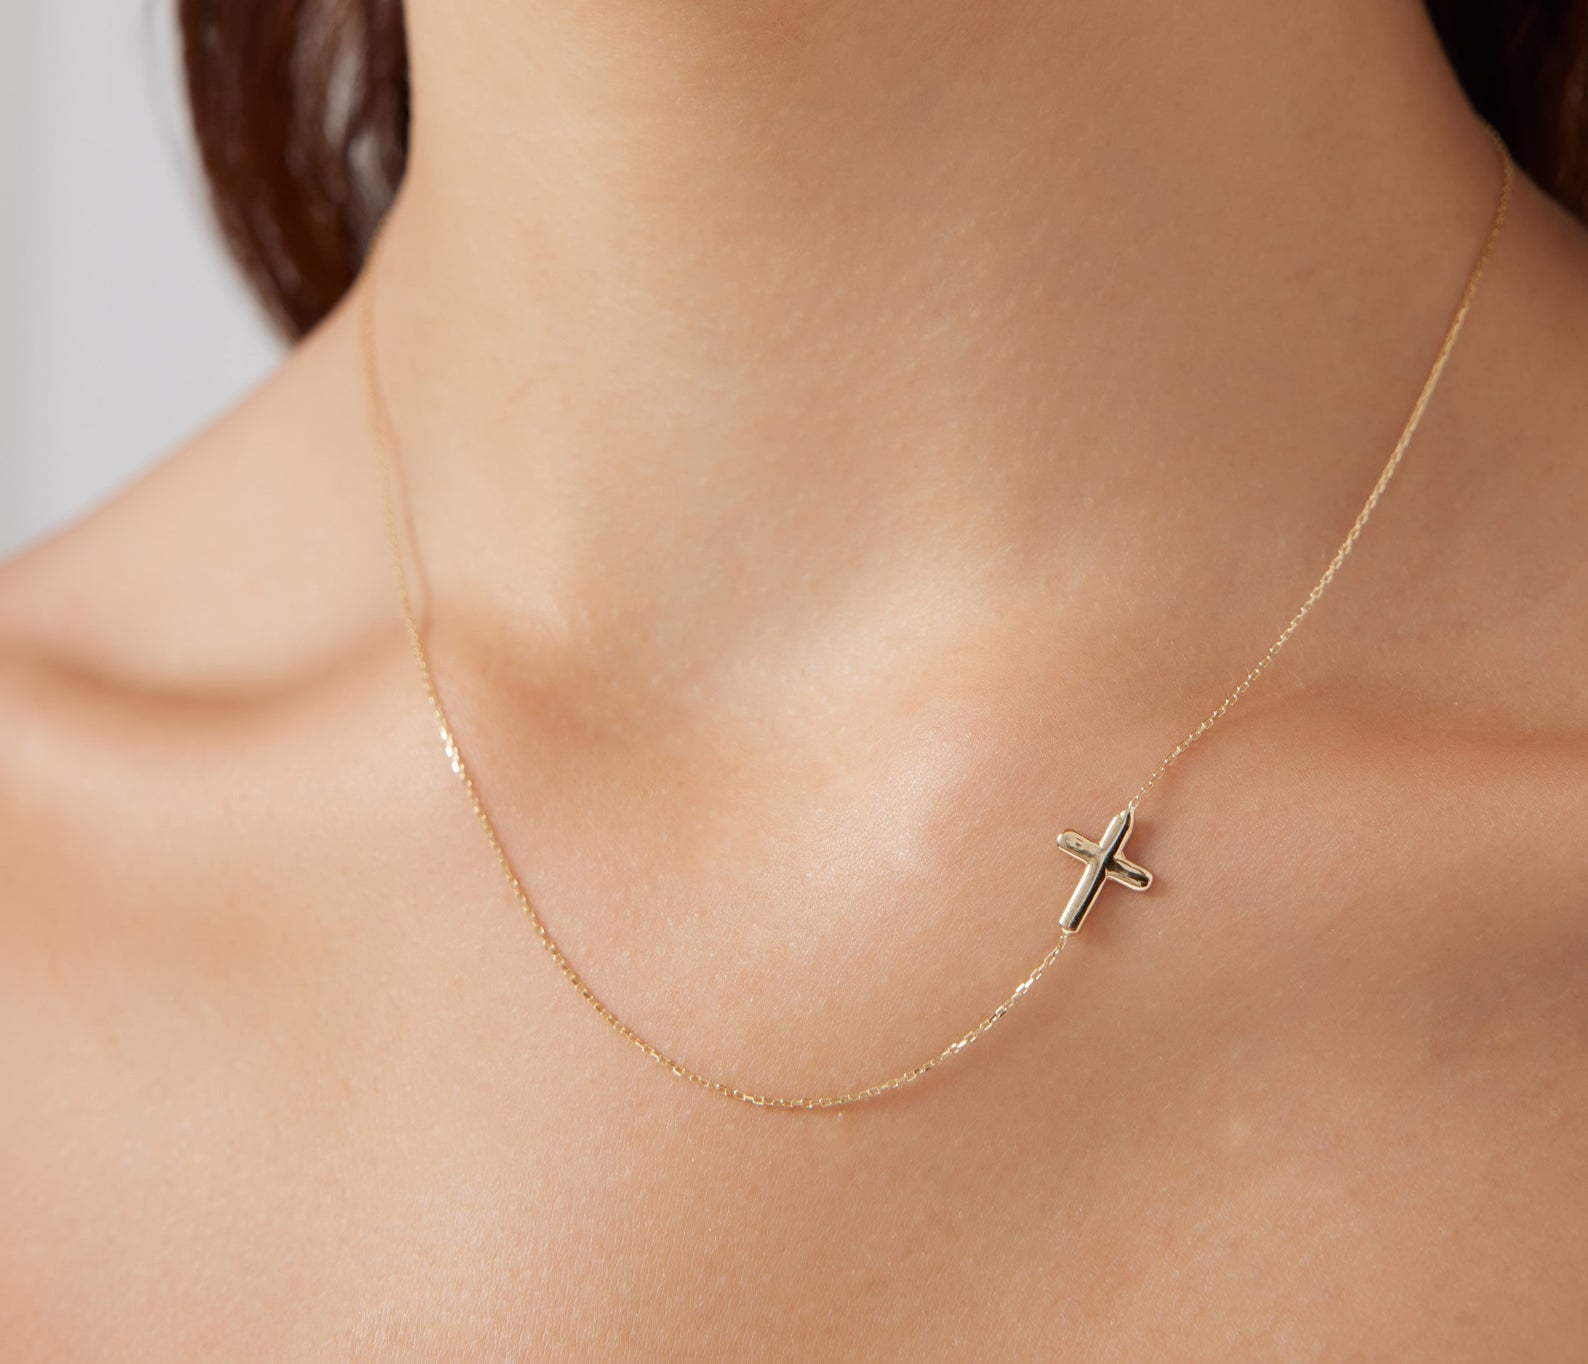 Cross Necklace Charm in 14K Gold